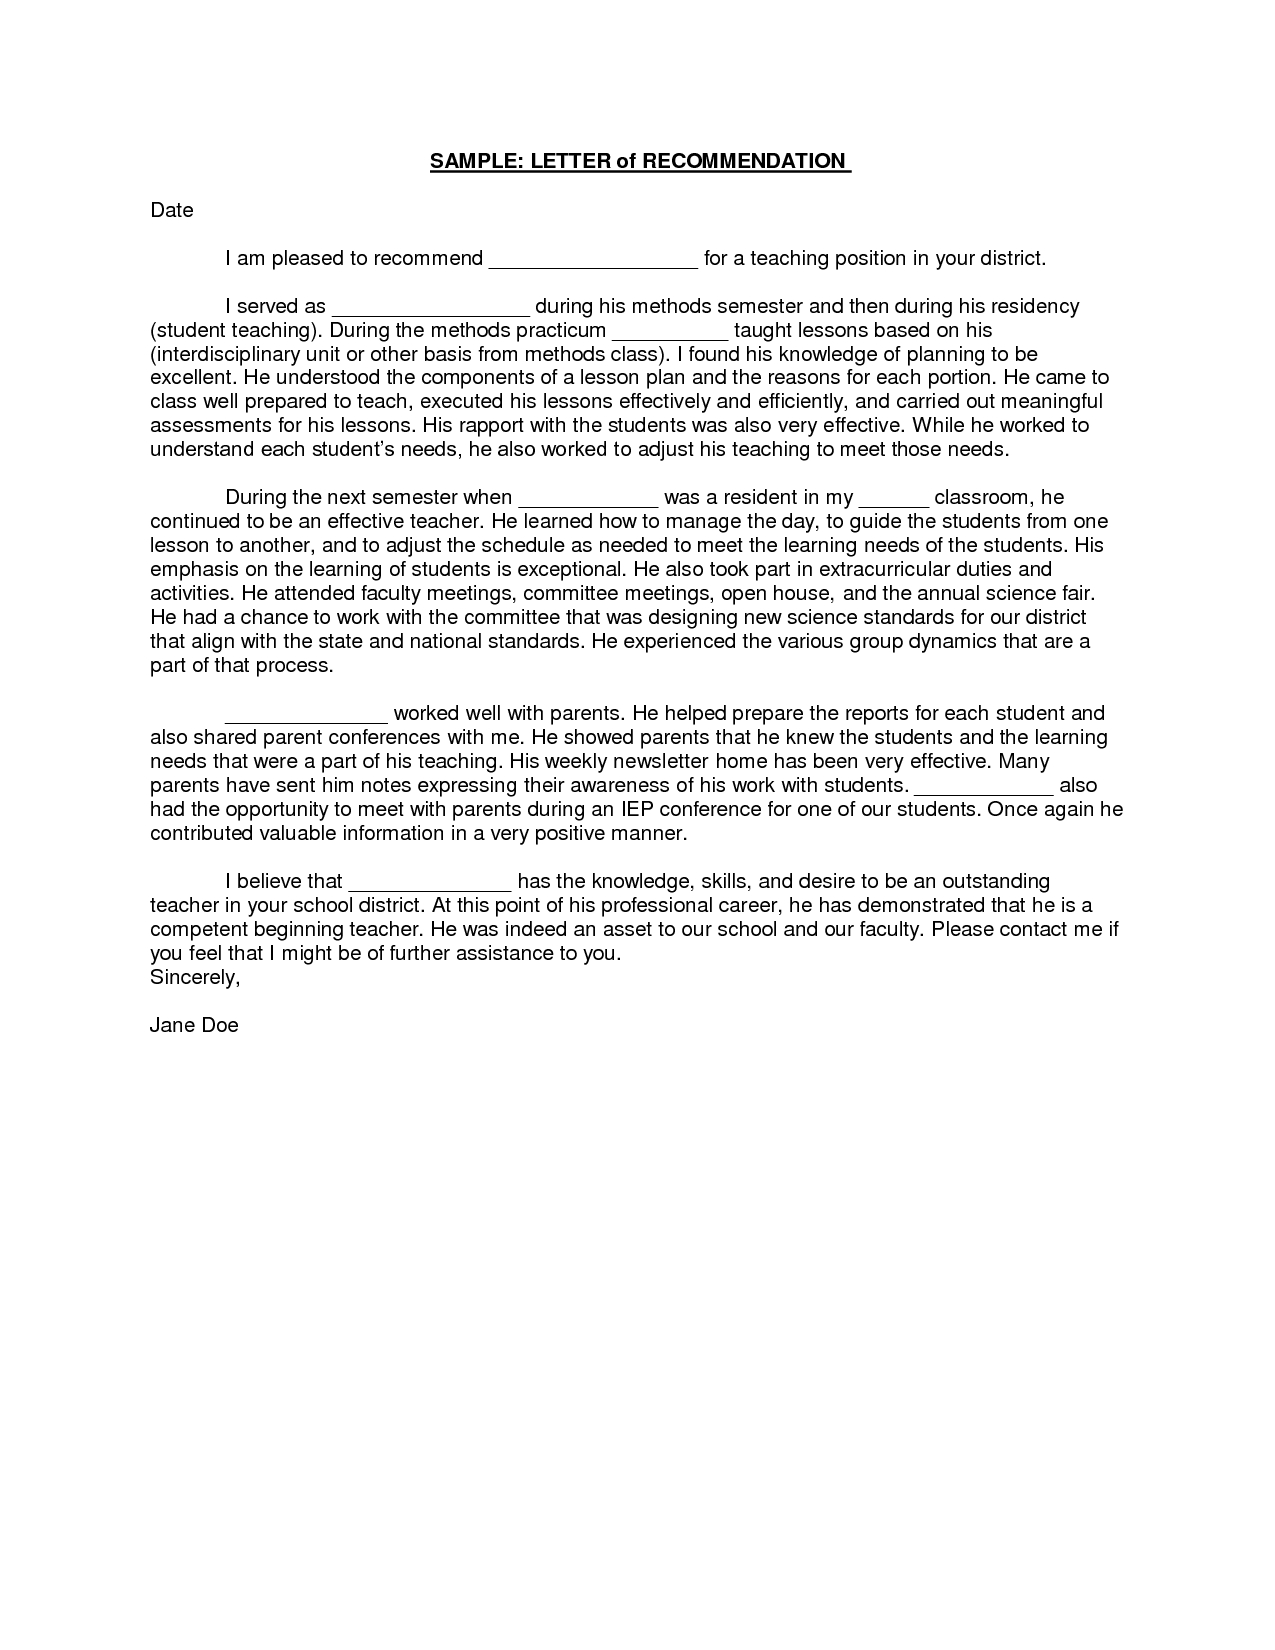 Teacher Recommendation Letter A Letter Of Recommendation intended for size 1275 X 1650